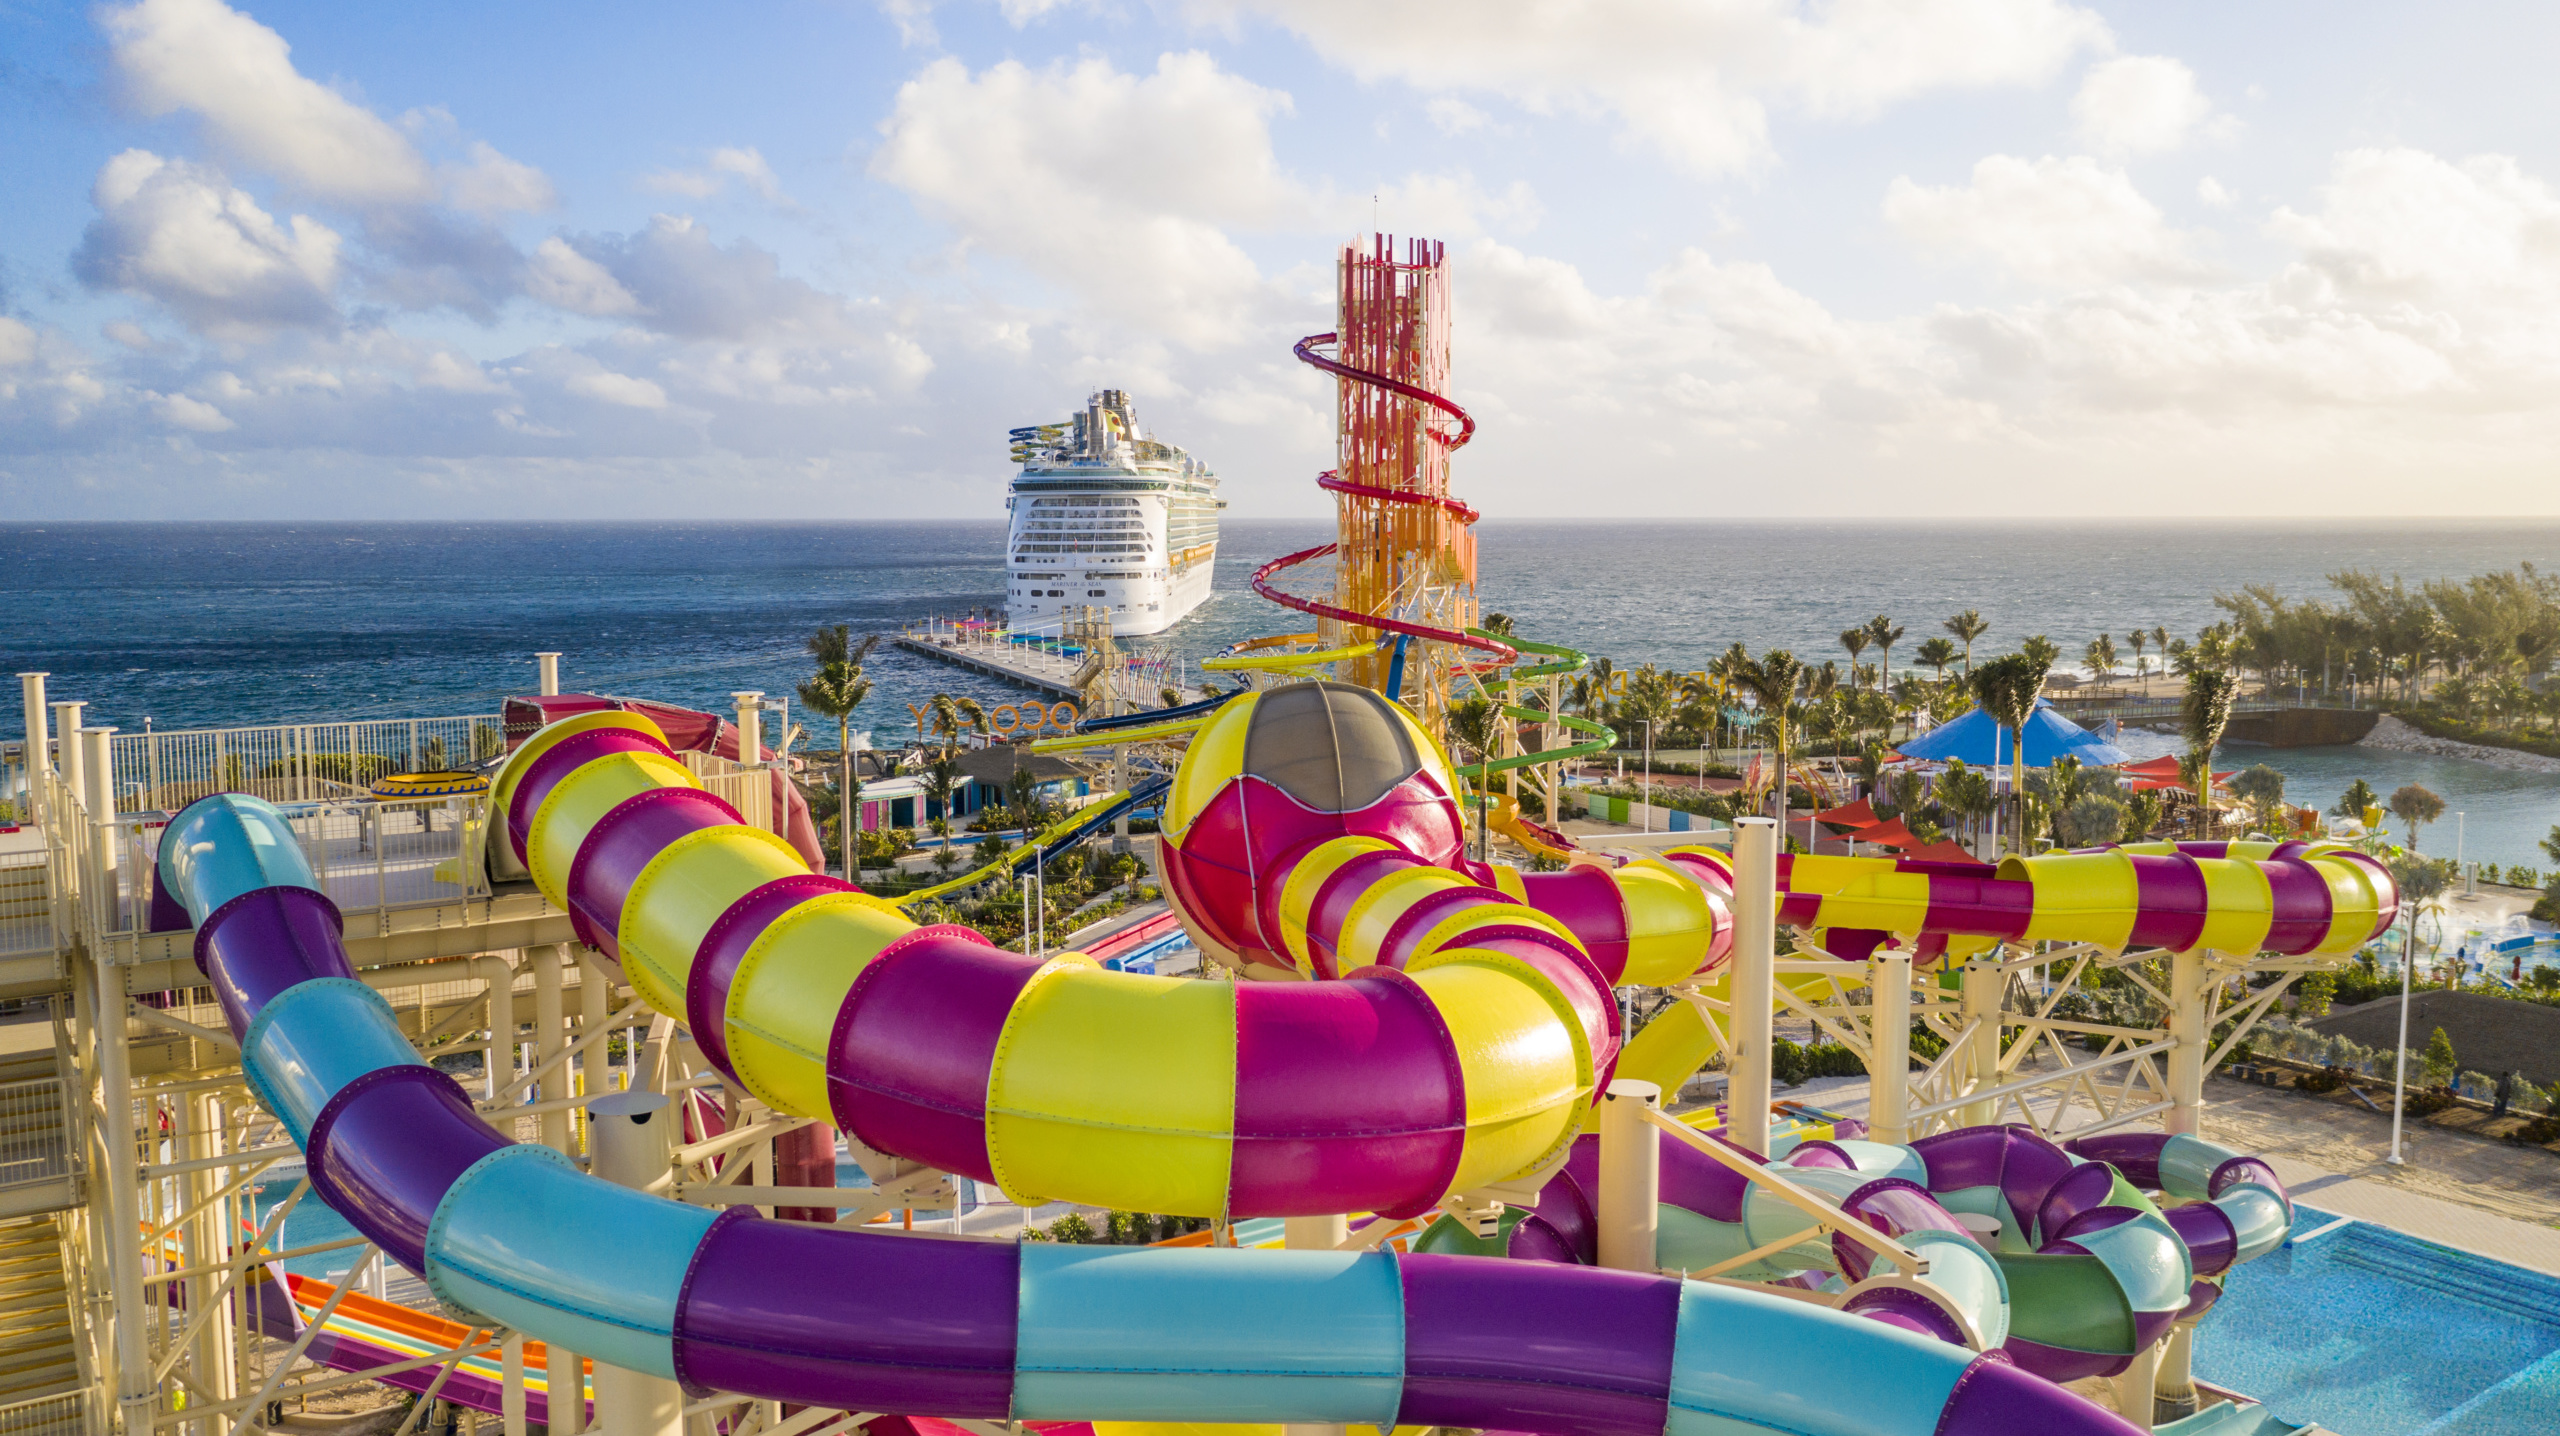 colorful water slides and water slide tower with cruise ship in the background